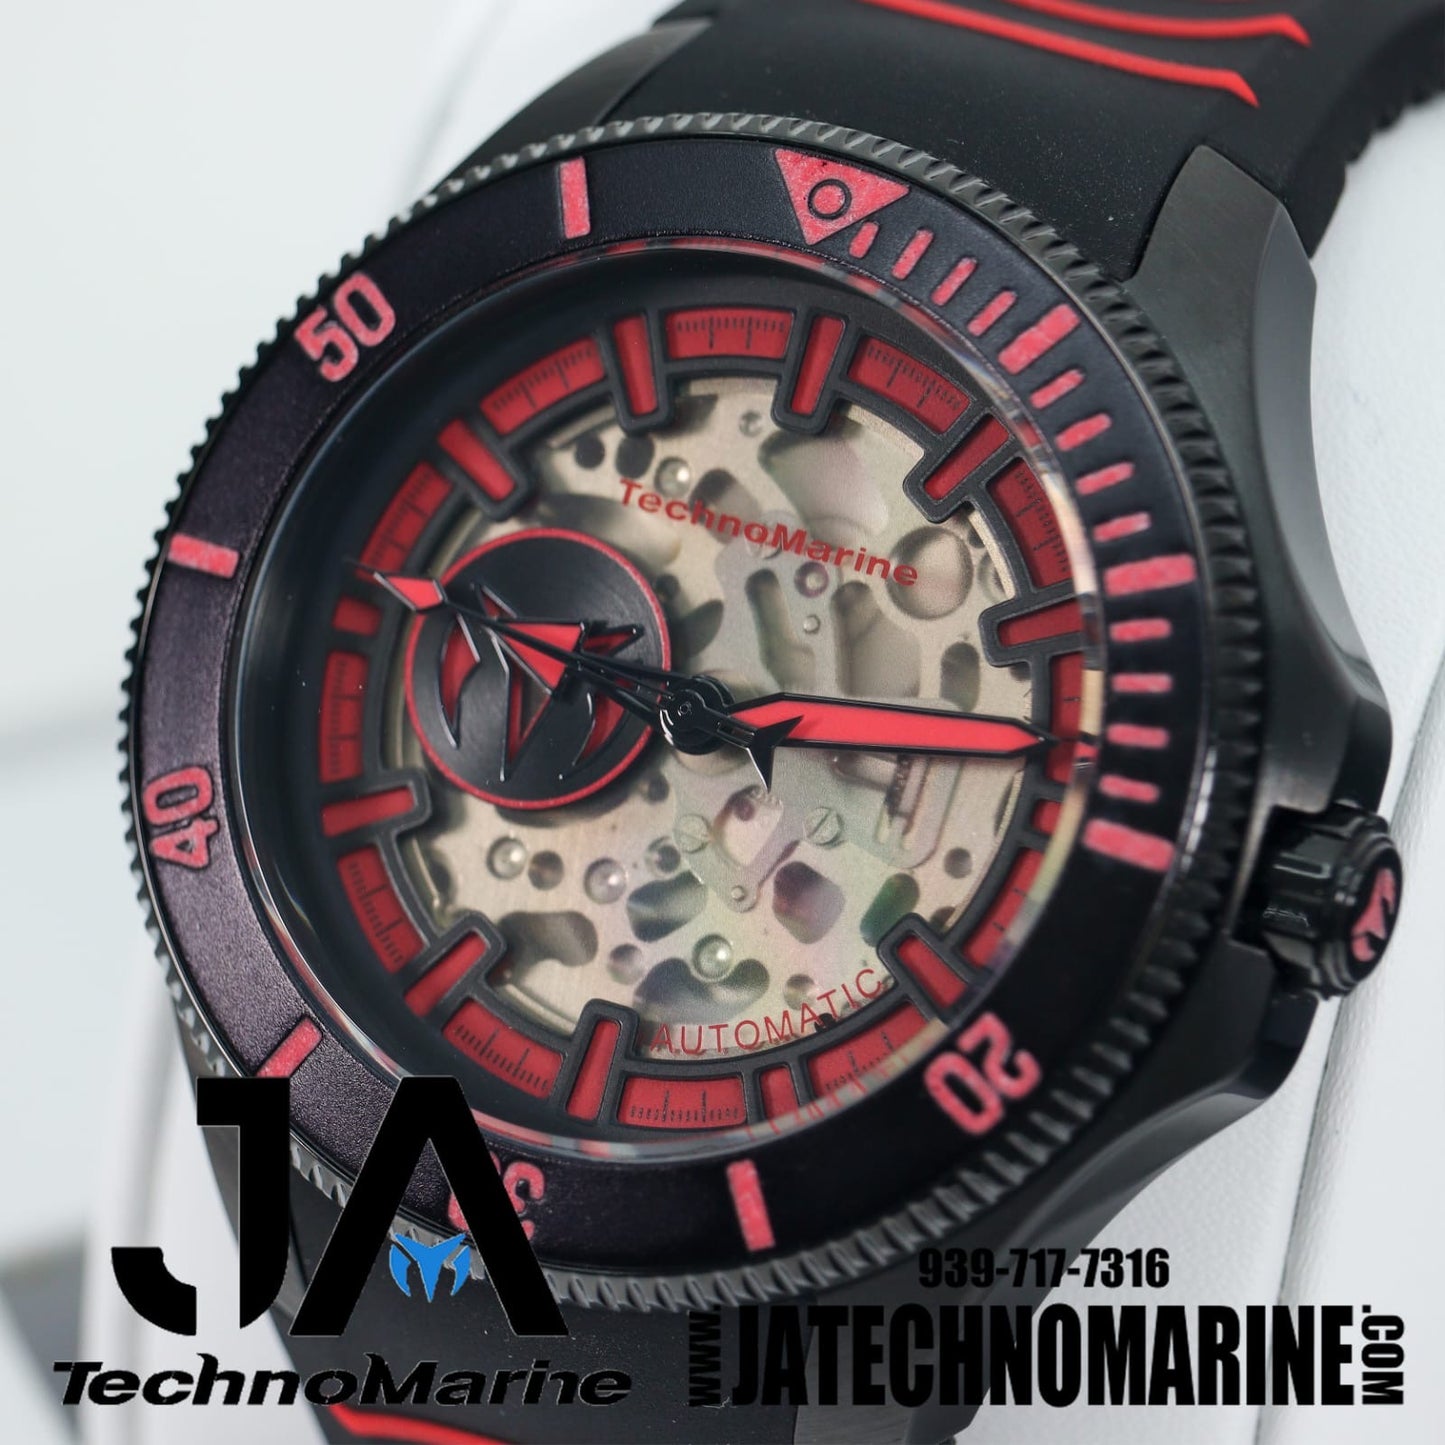 Technomarine Shark Cruise, Men's Watch, Stainless Steel Case, Silicone Strap, Mechanicall Automatic